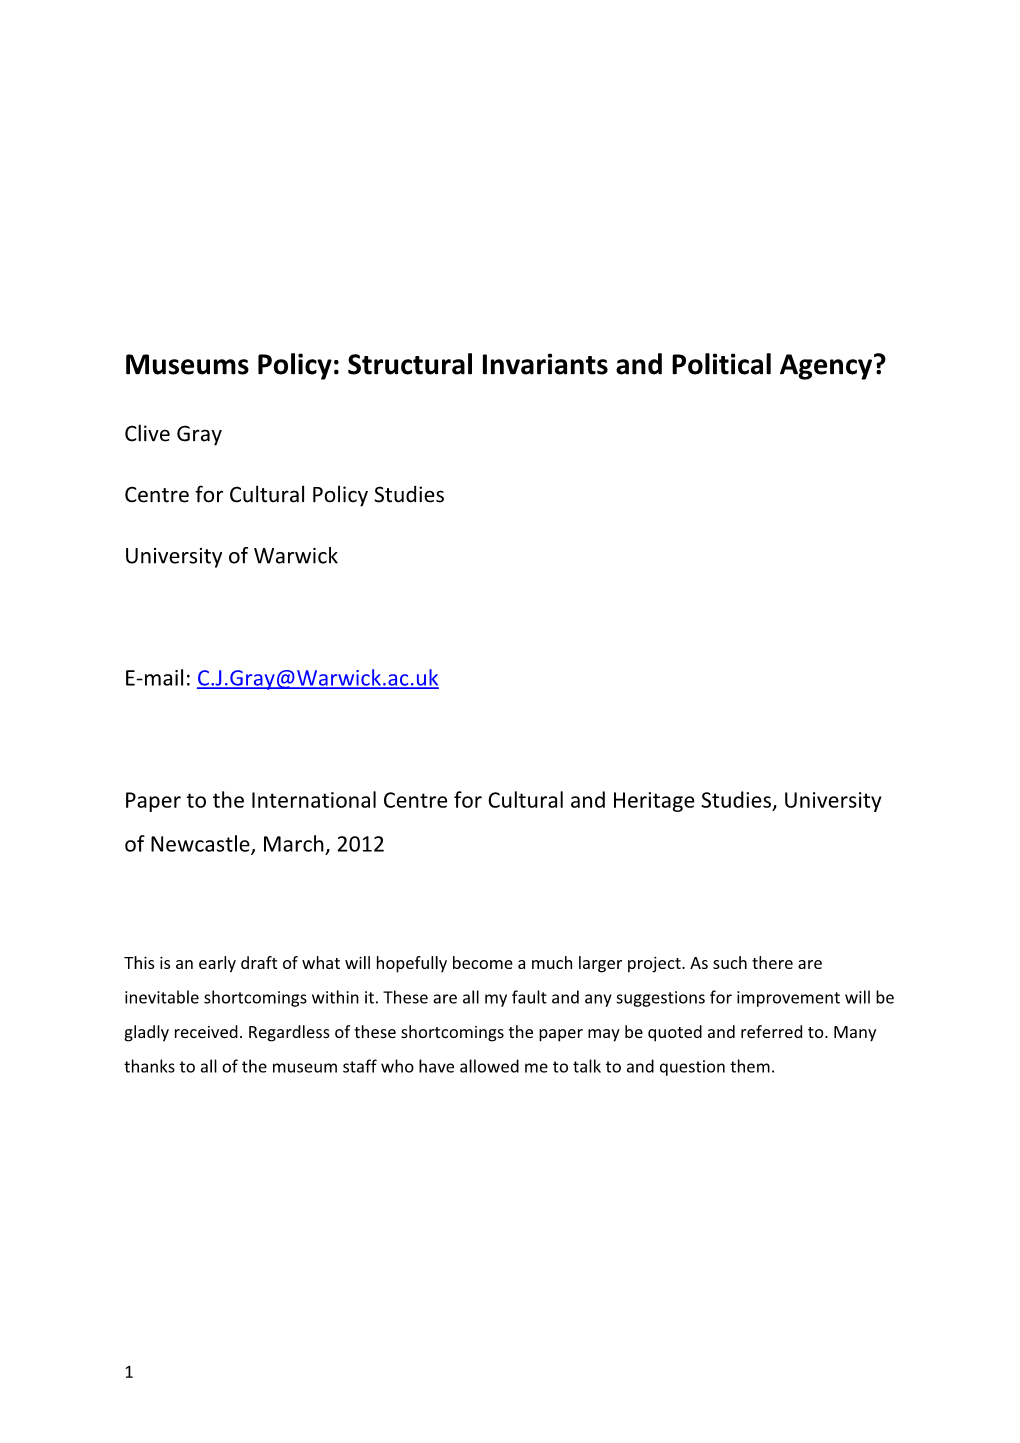 Museums Policy: Structural Invariants and Political Agency?